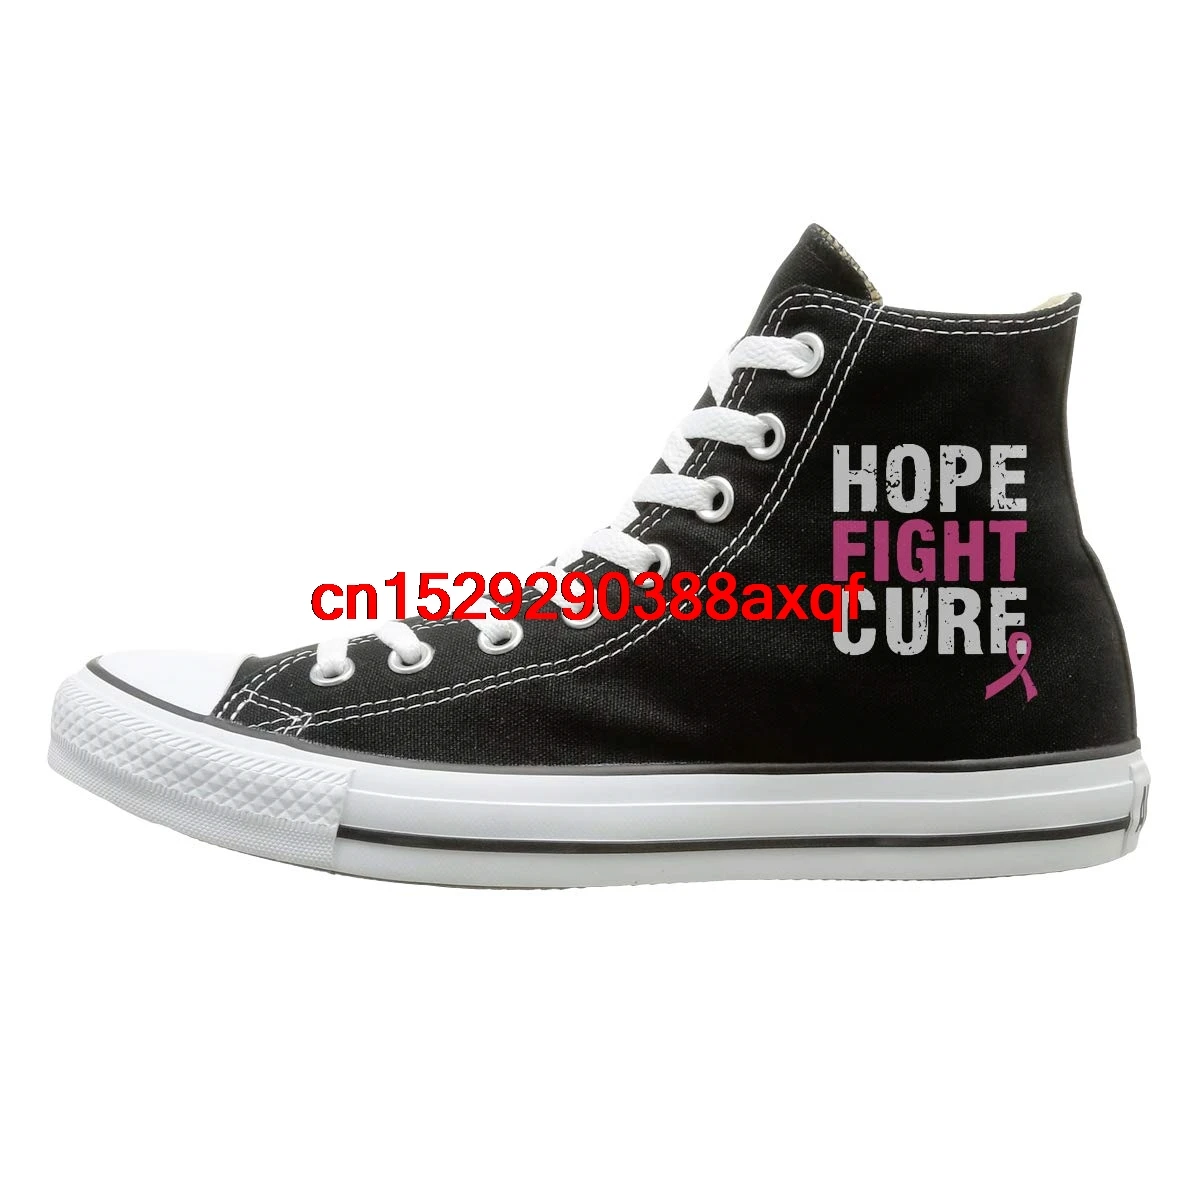 

Canvas Shoes Hope Fight Cure Breast Cancer Awareness Casual High Top Lace Ups Canvas Sneakers For Men's Women's